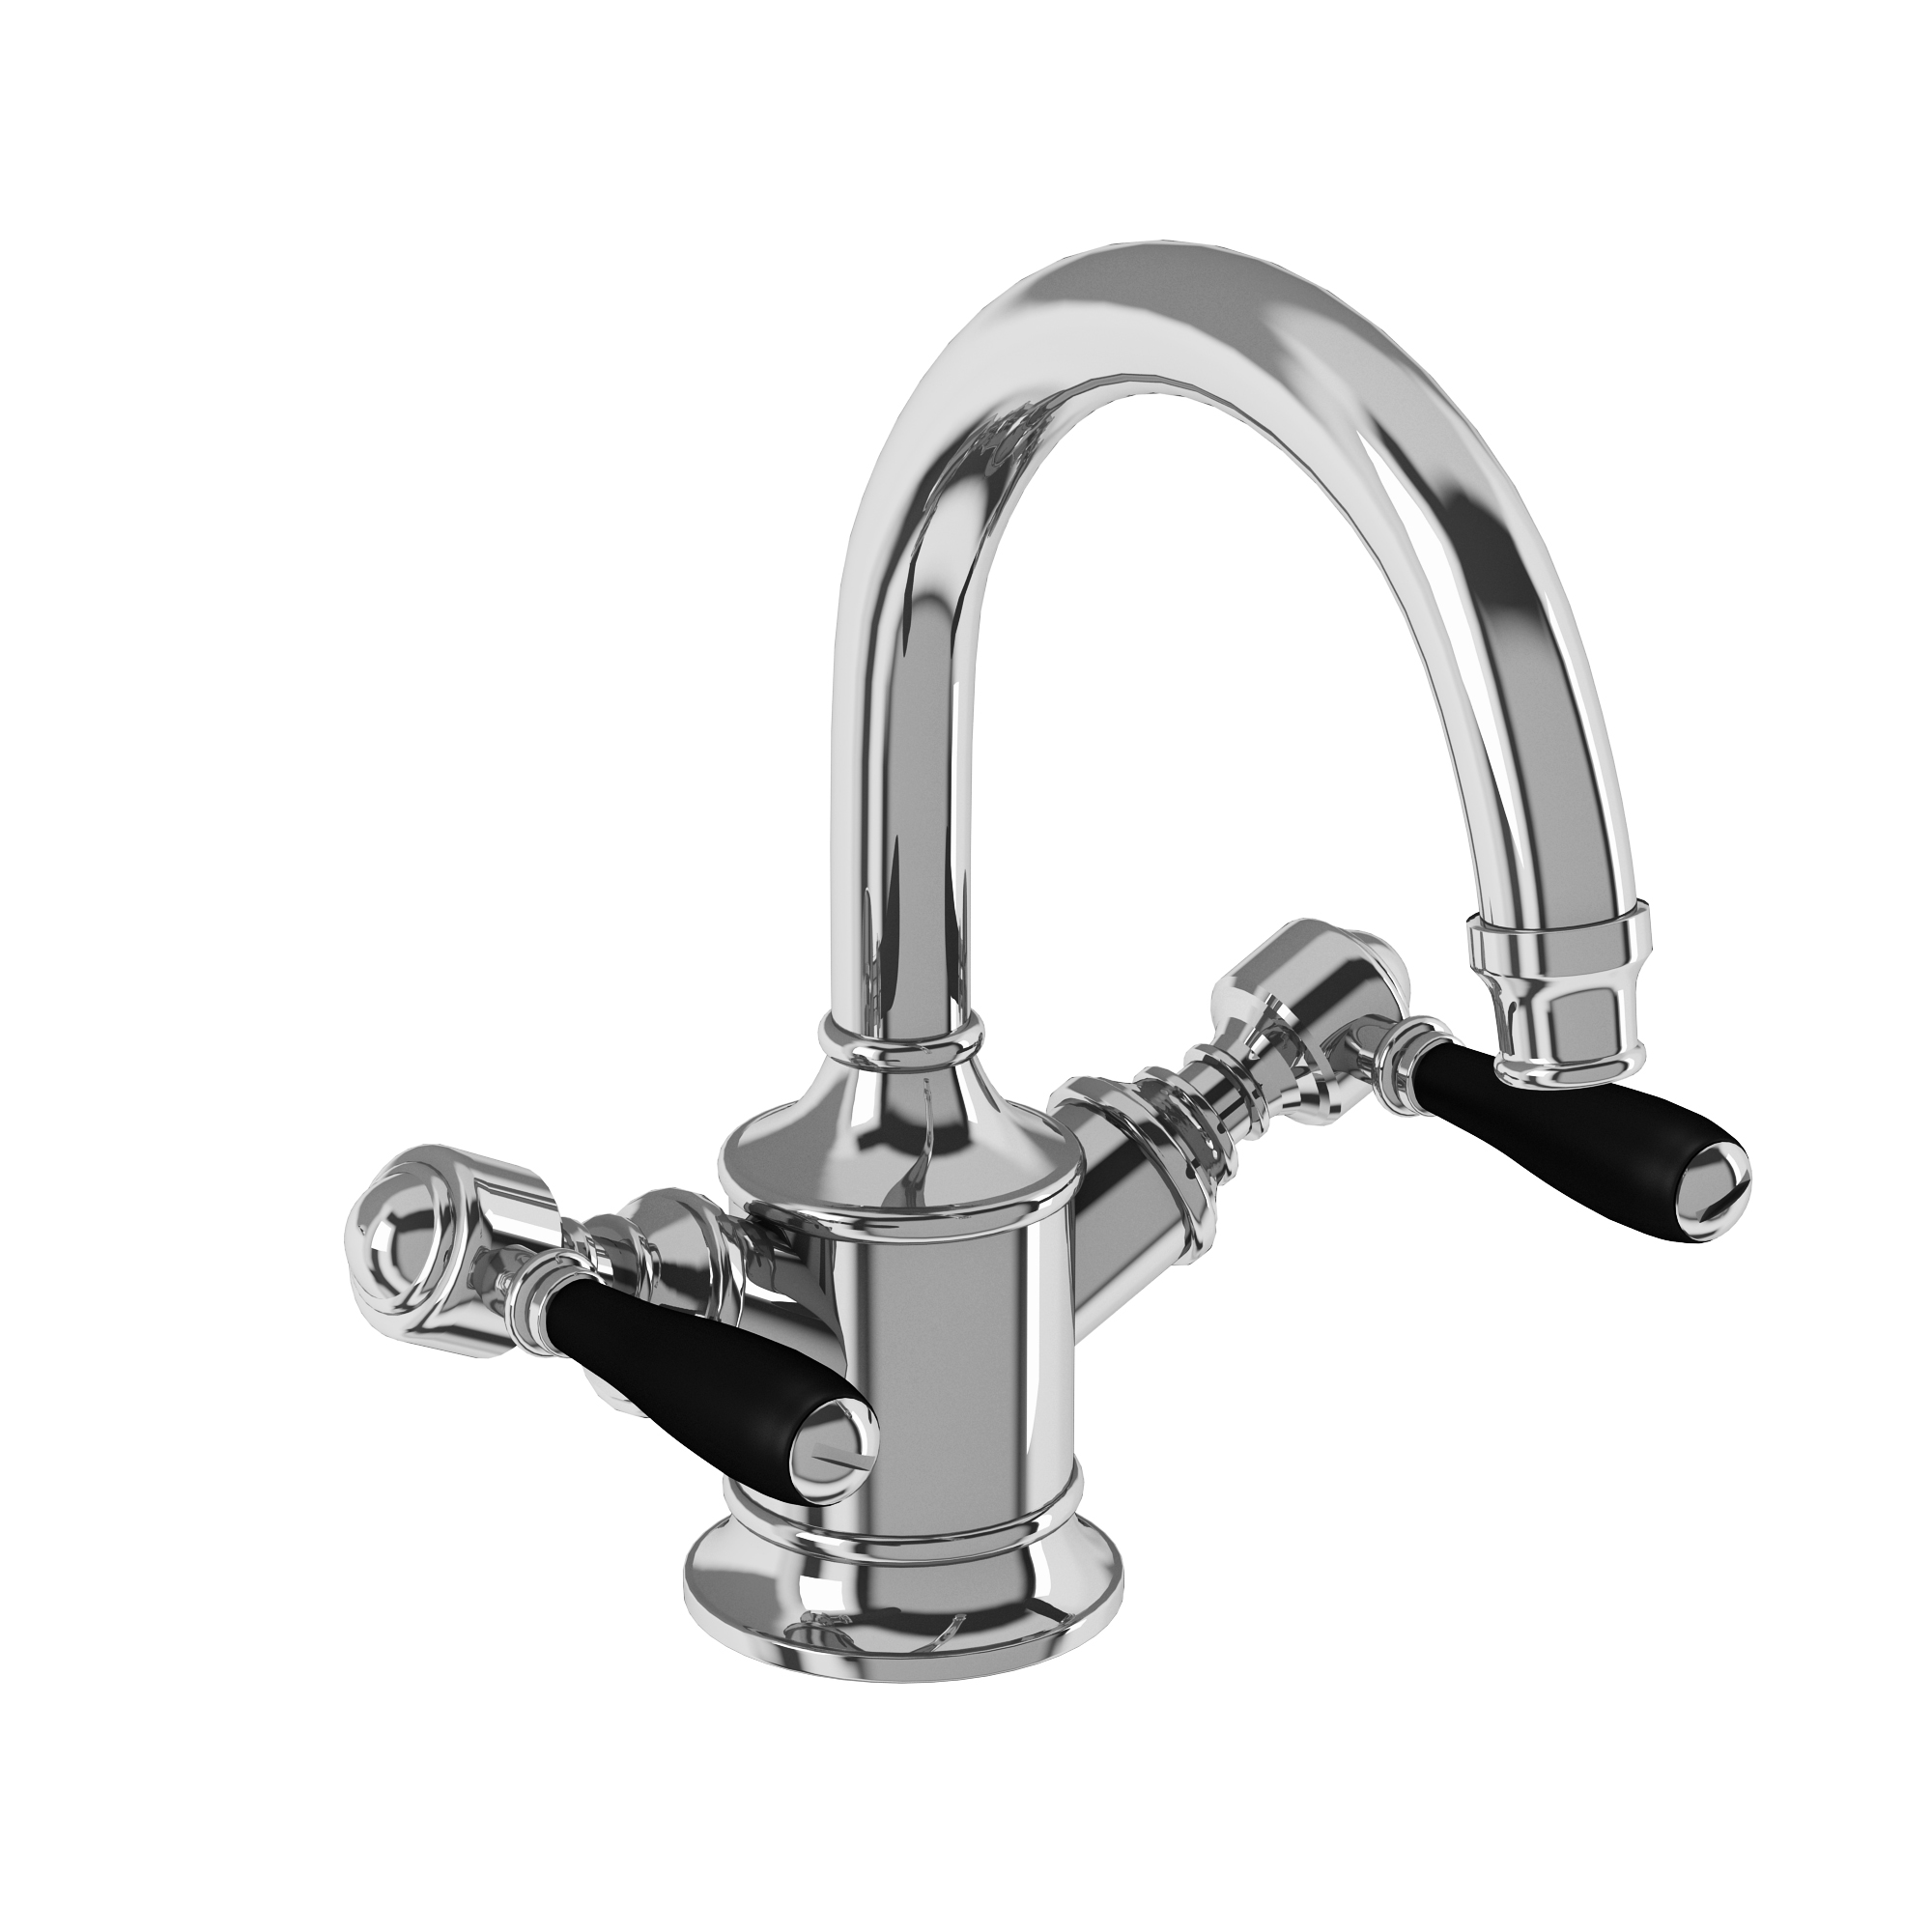 Arcade Dual-lever basin mixer without pop up waste - chrome - with black lever